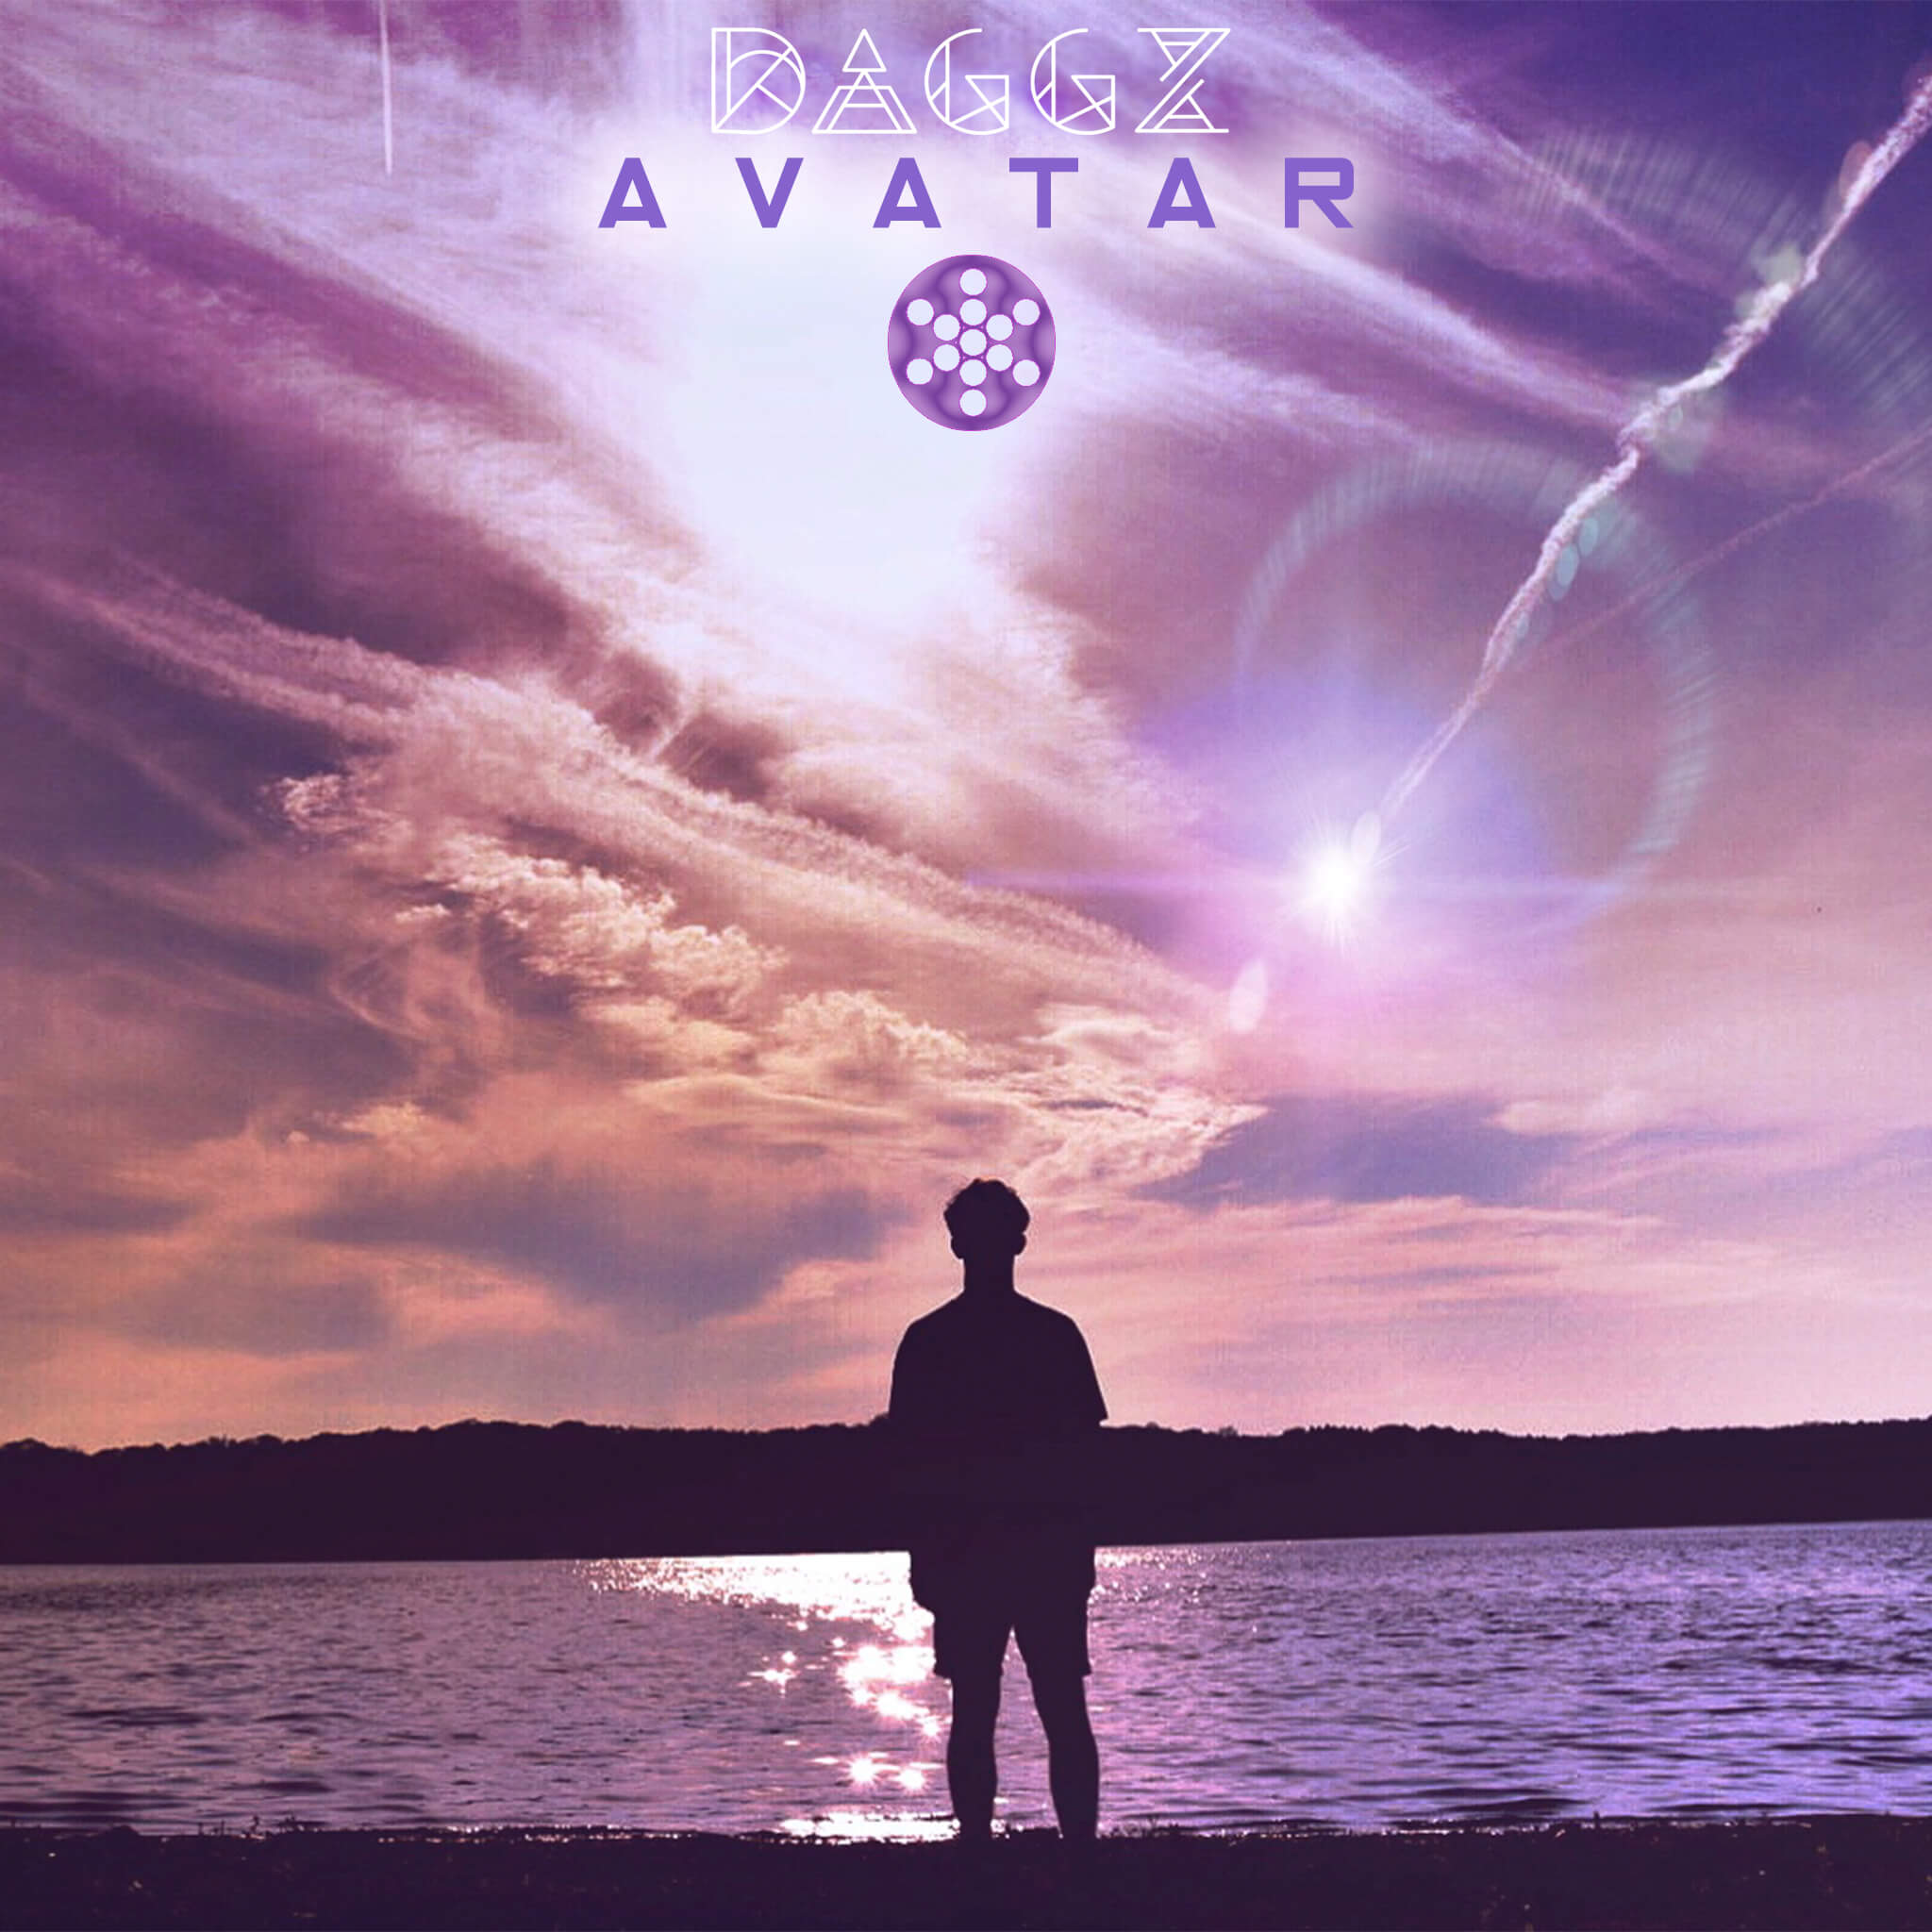 Daggz Takes You to Another Galaxy in New Track ‘Avatar’ [EXCLUSIVE PREMIERE]